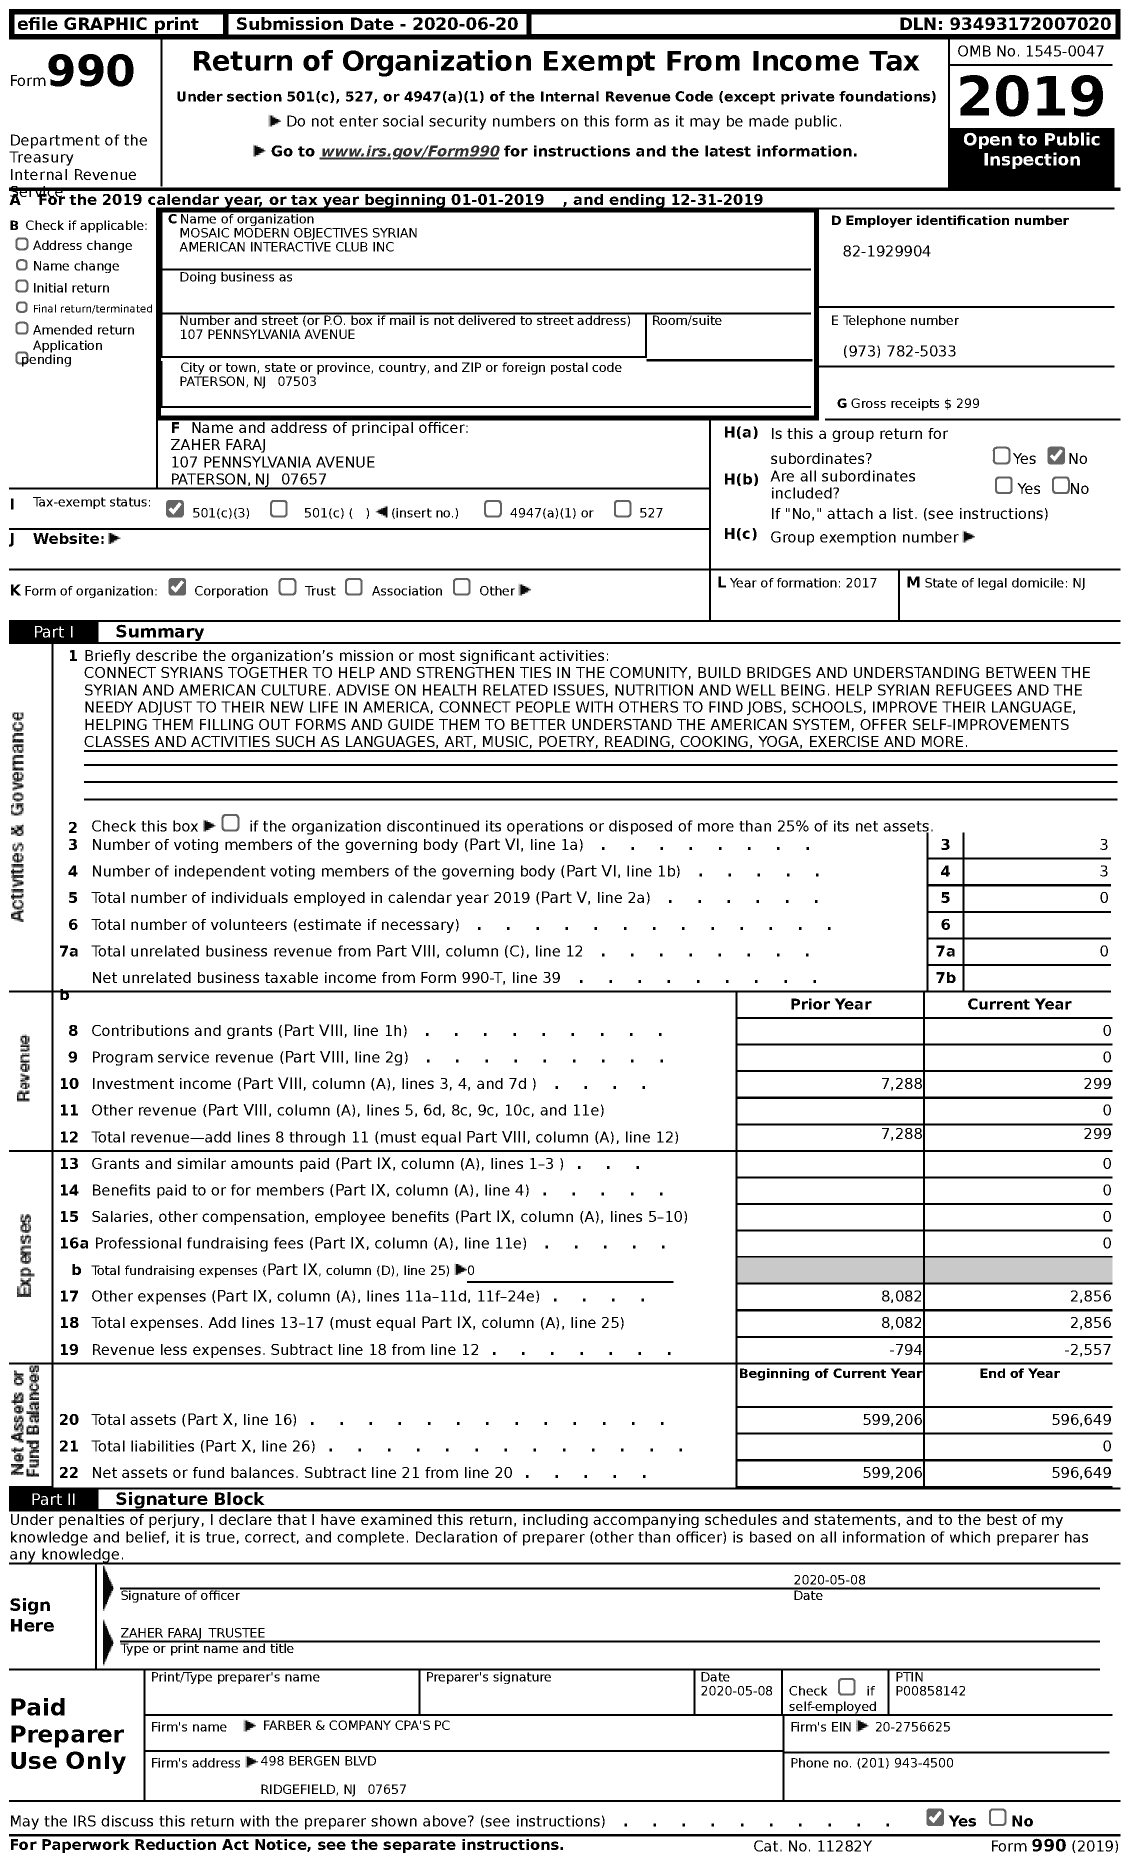 Image of first page of 2019 Form 990 for Mosaic Modern Objectives Syrain American Interactive Club